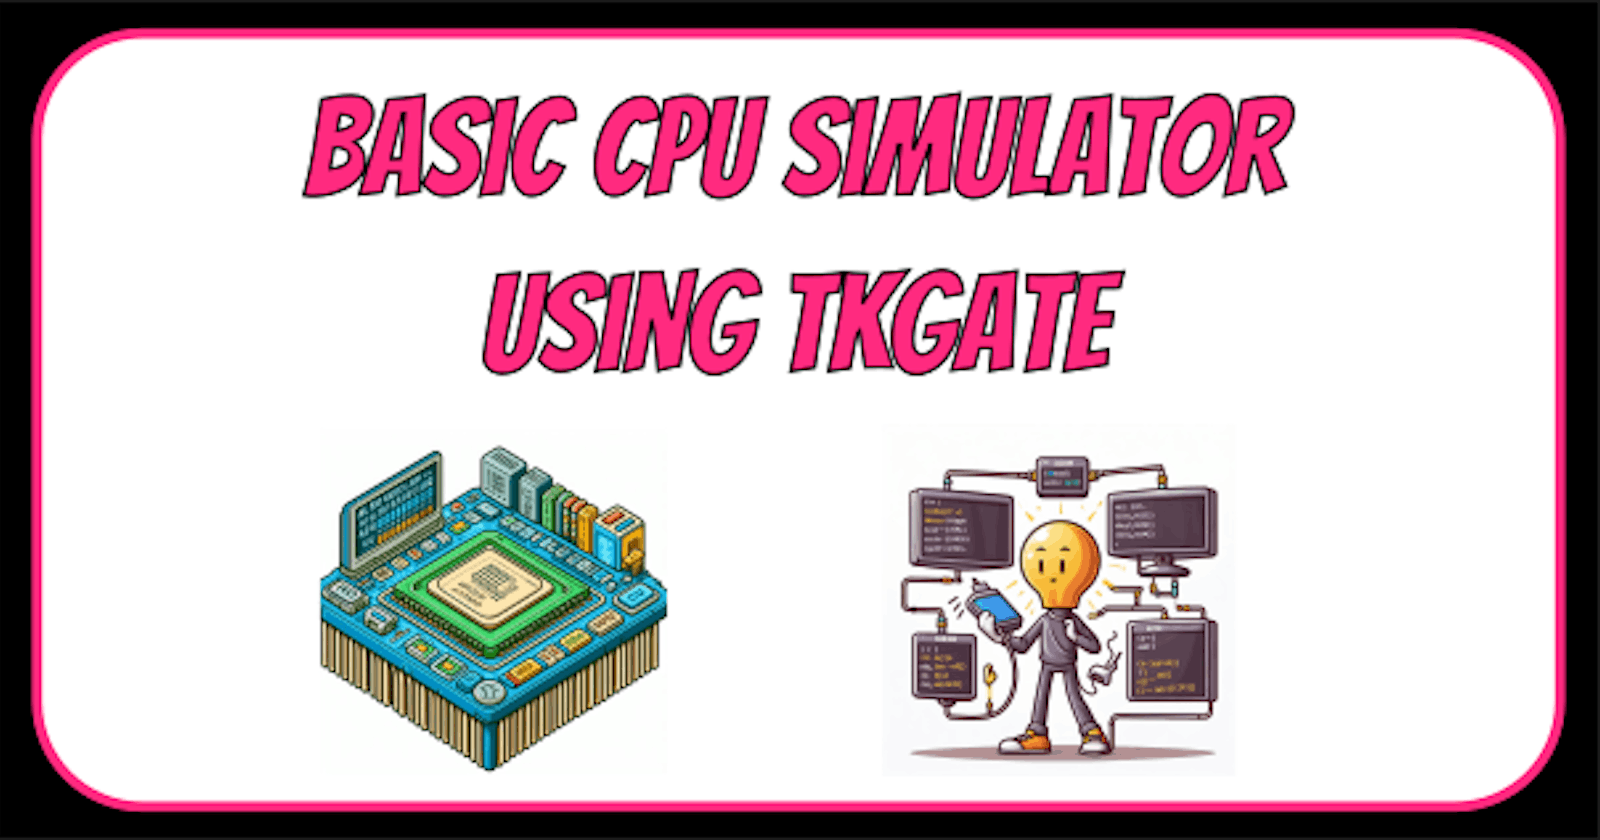 Building a Basic CPU Simulator with TkGate on Linux: A Journey into Computer Architecture